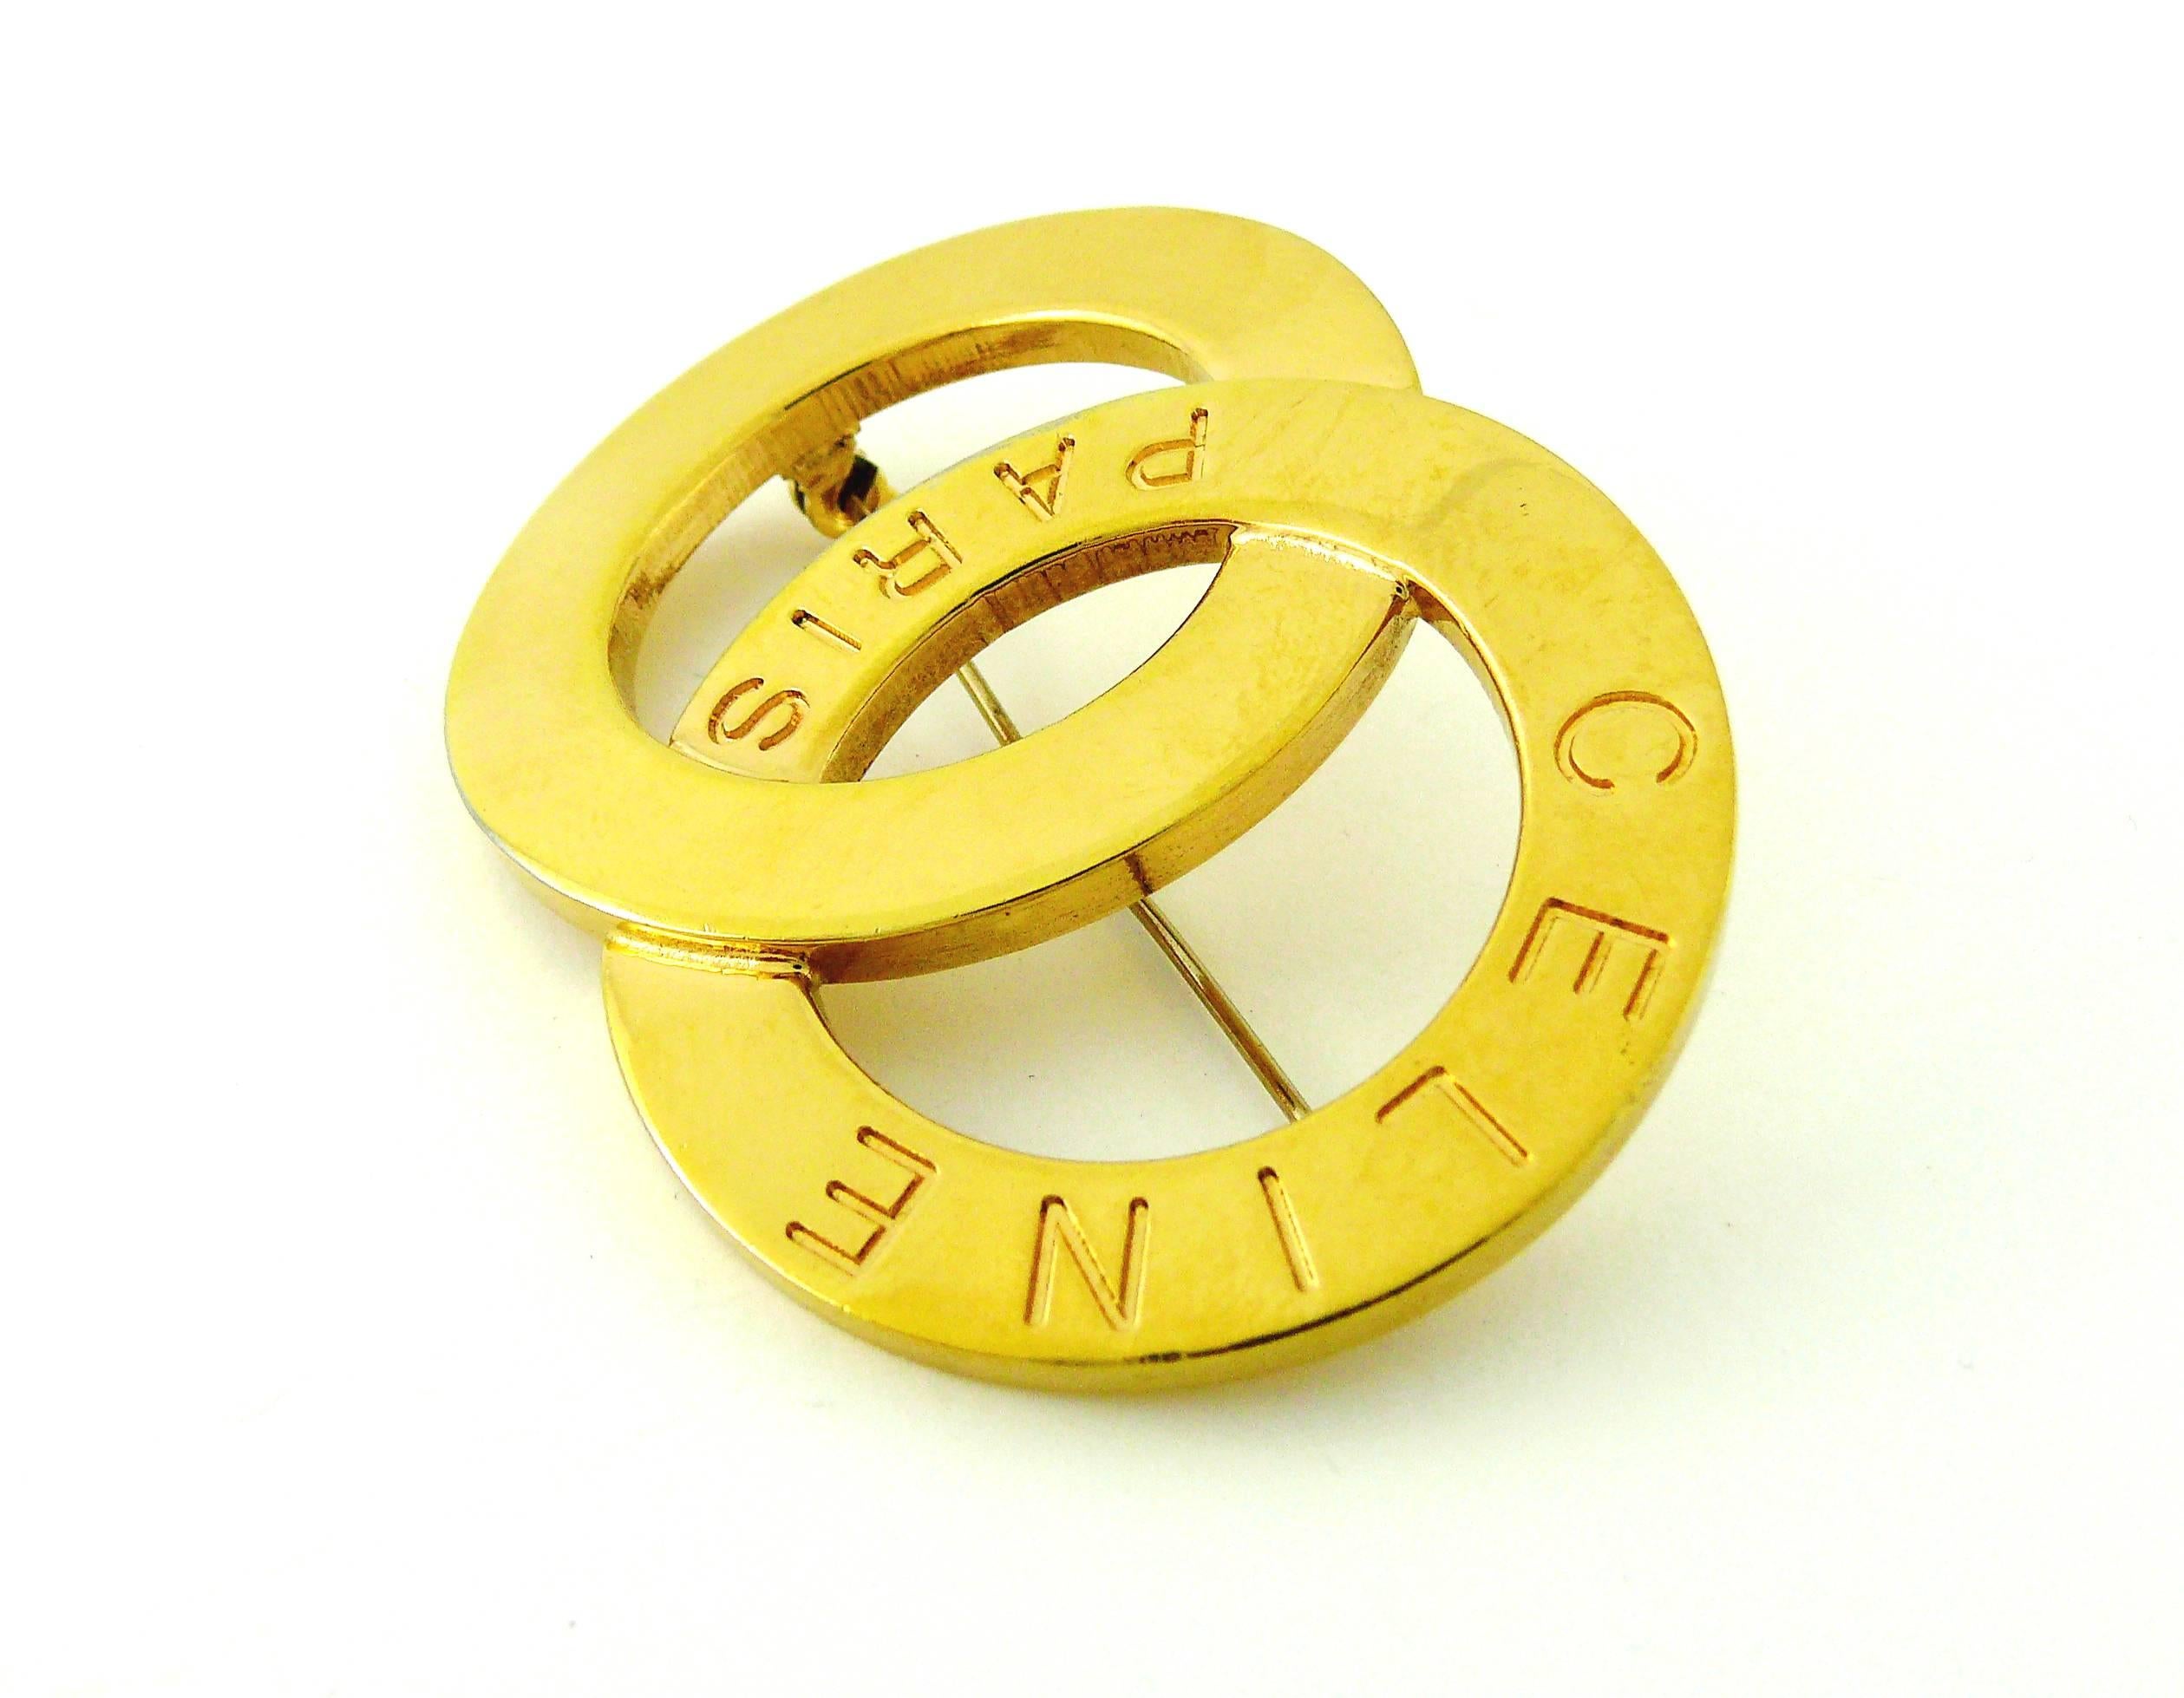 CELINE Paris vintage gold toned double ring brooch.

Embossed CELINE Paris at the front.
Marked CELINE LE Made in Italy on the reverse.

JEWELRY CONDITION CHART
- New or never worn : item is in pristine condition with no noticeable imperfections
-